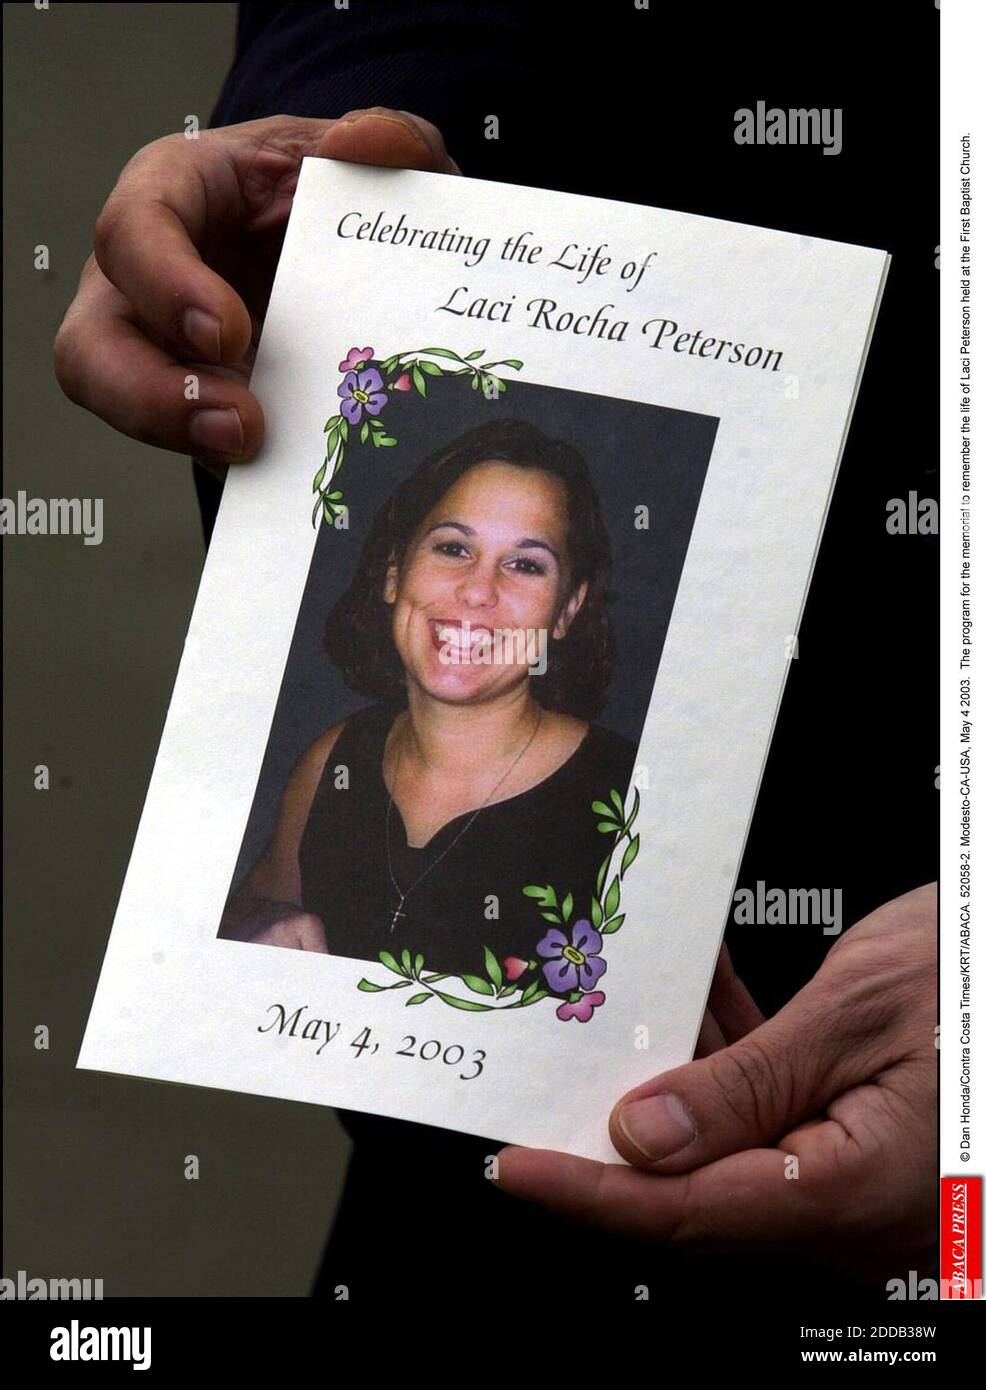 NO FILM, NO VIDEO, NO TV, NO DOCUMENTARY - © Dan Honda/Contra Costa Times/KRT/ABACA. 52058-2. Modesto-CA-USA, May 4 2003. The program for the memorial to remember the life of Laci Peterson held at the First Baptist Church. Stock Photo